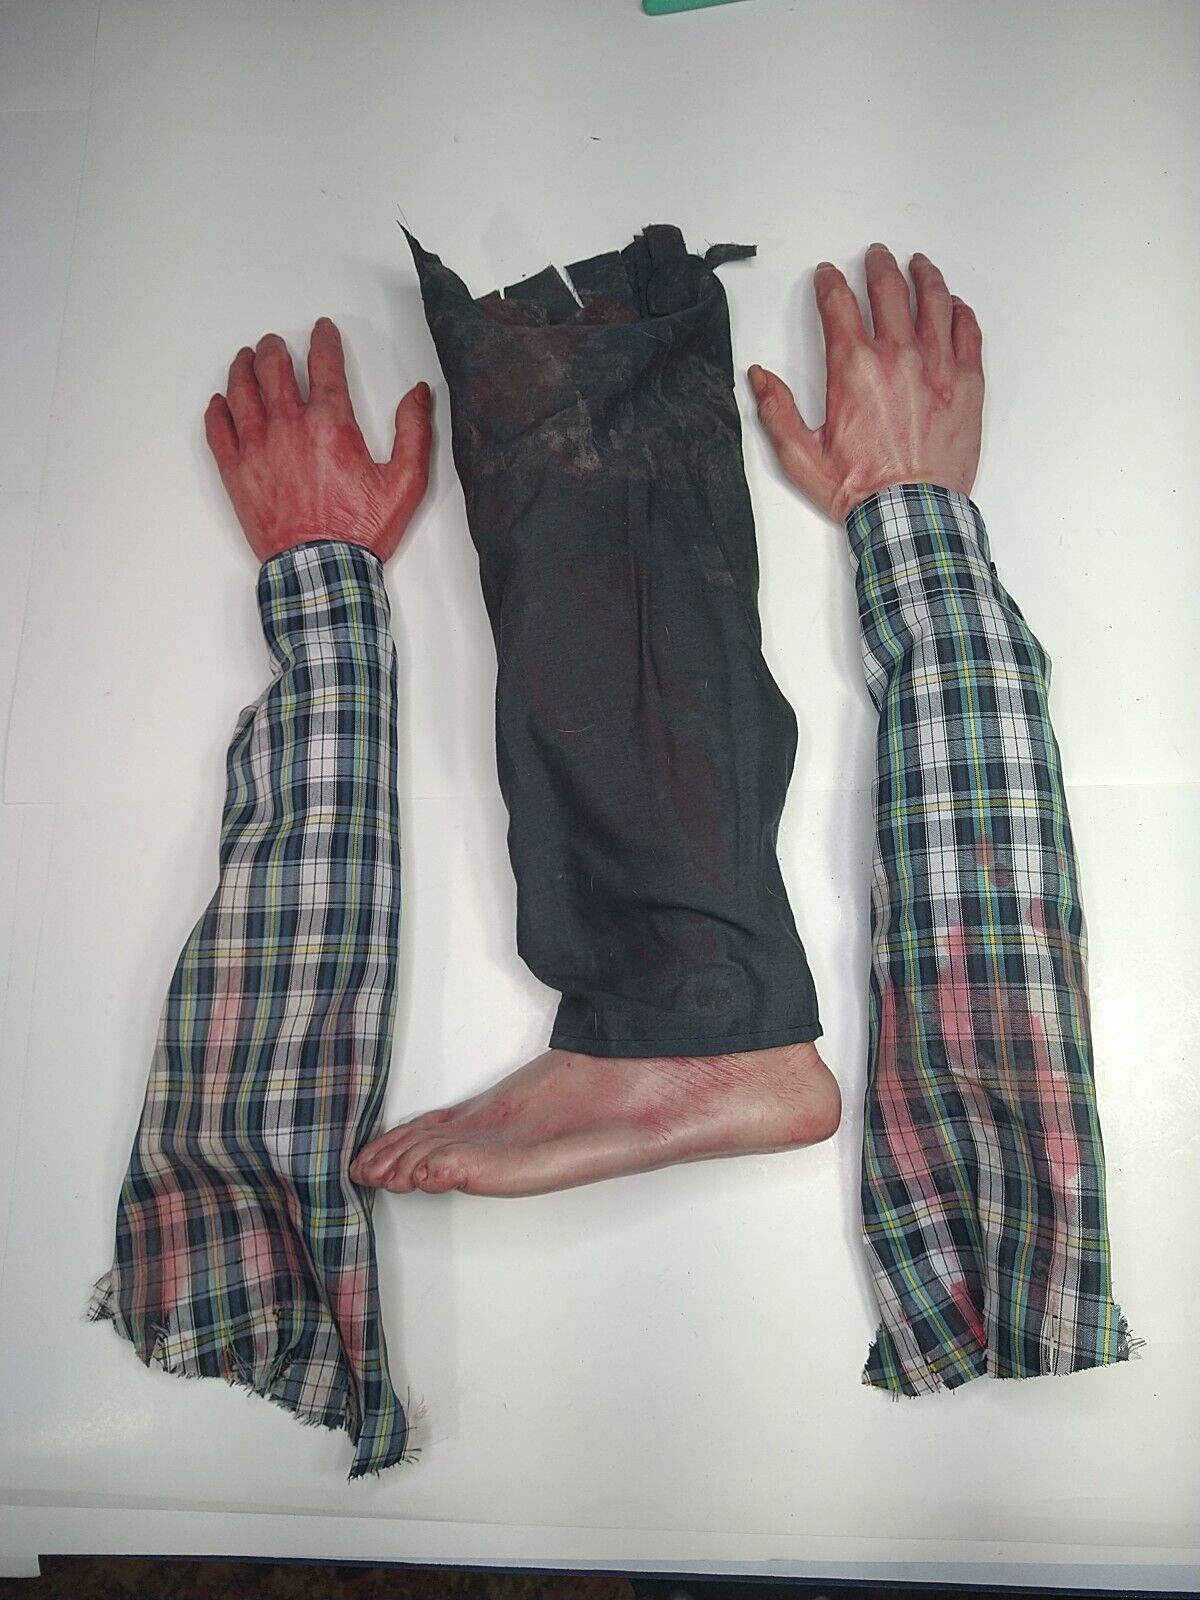 Bloody Severed Arms And 1 Leg Halloween Props [Lot 2 Arms 1 Leg] Used